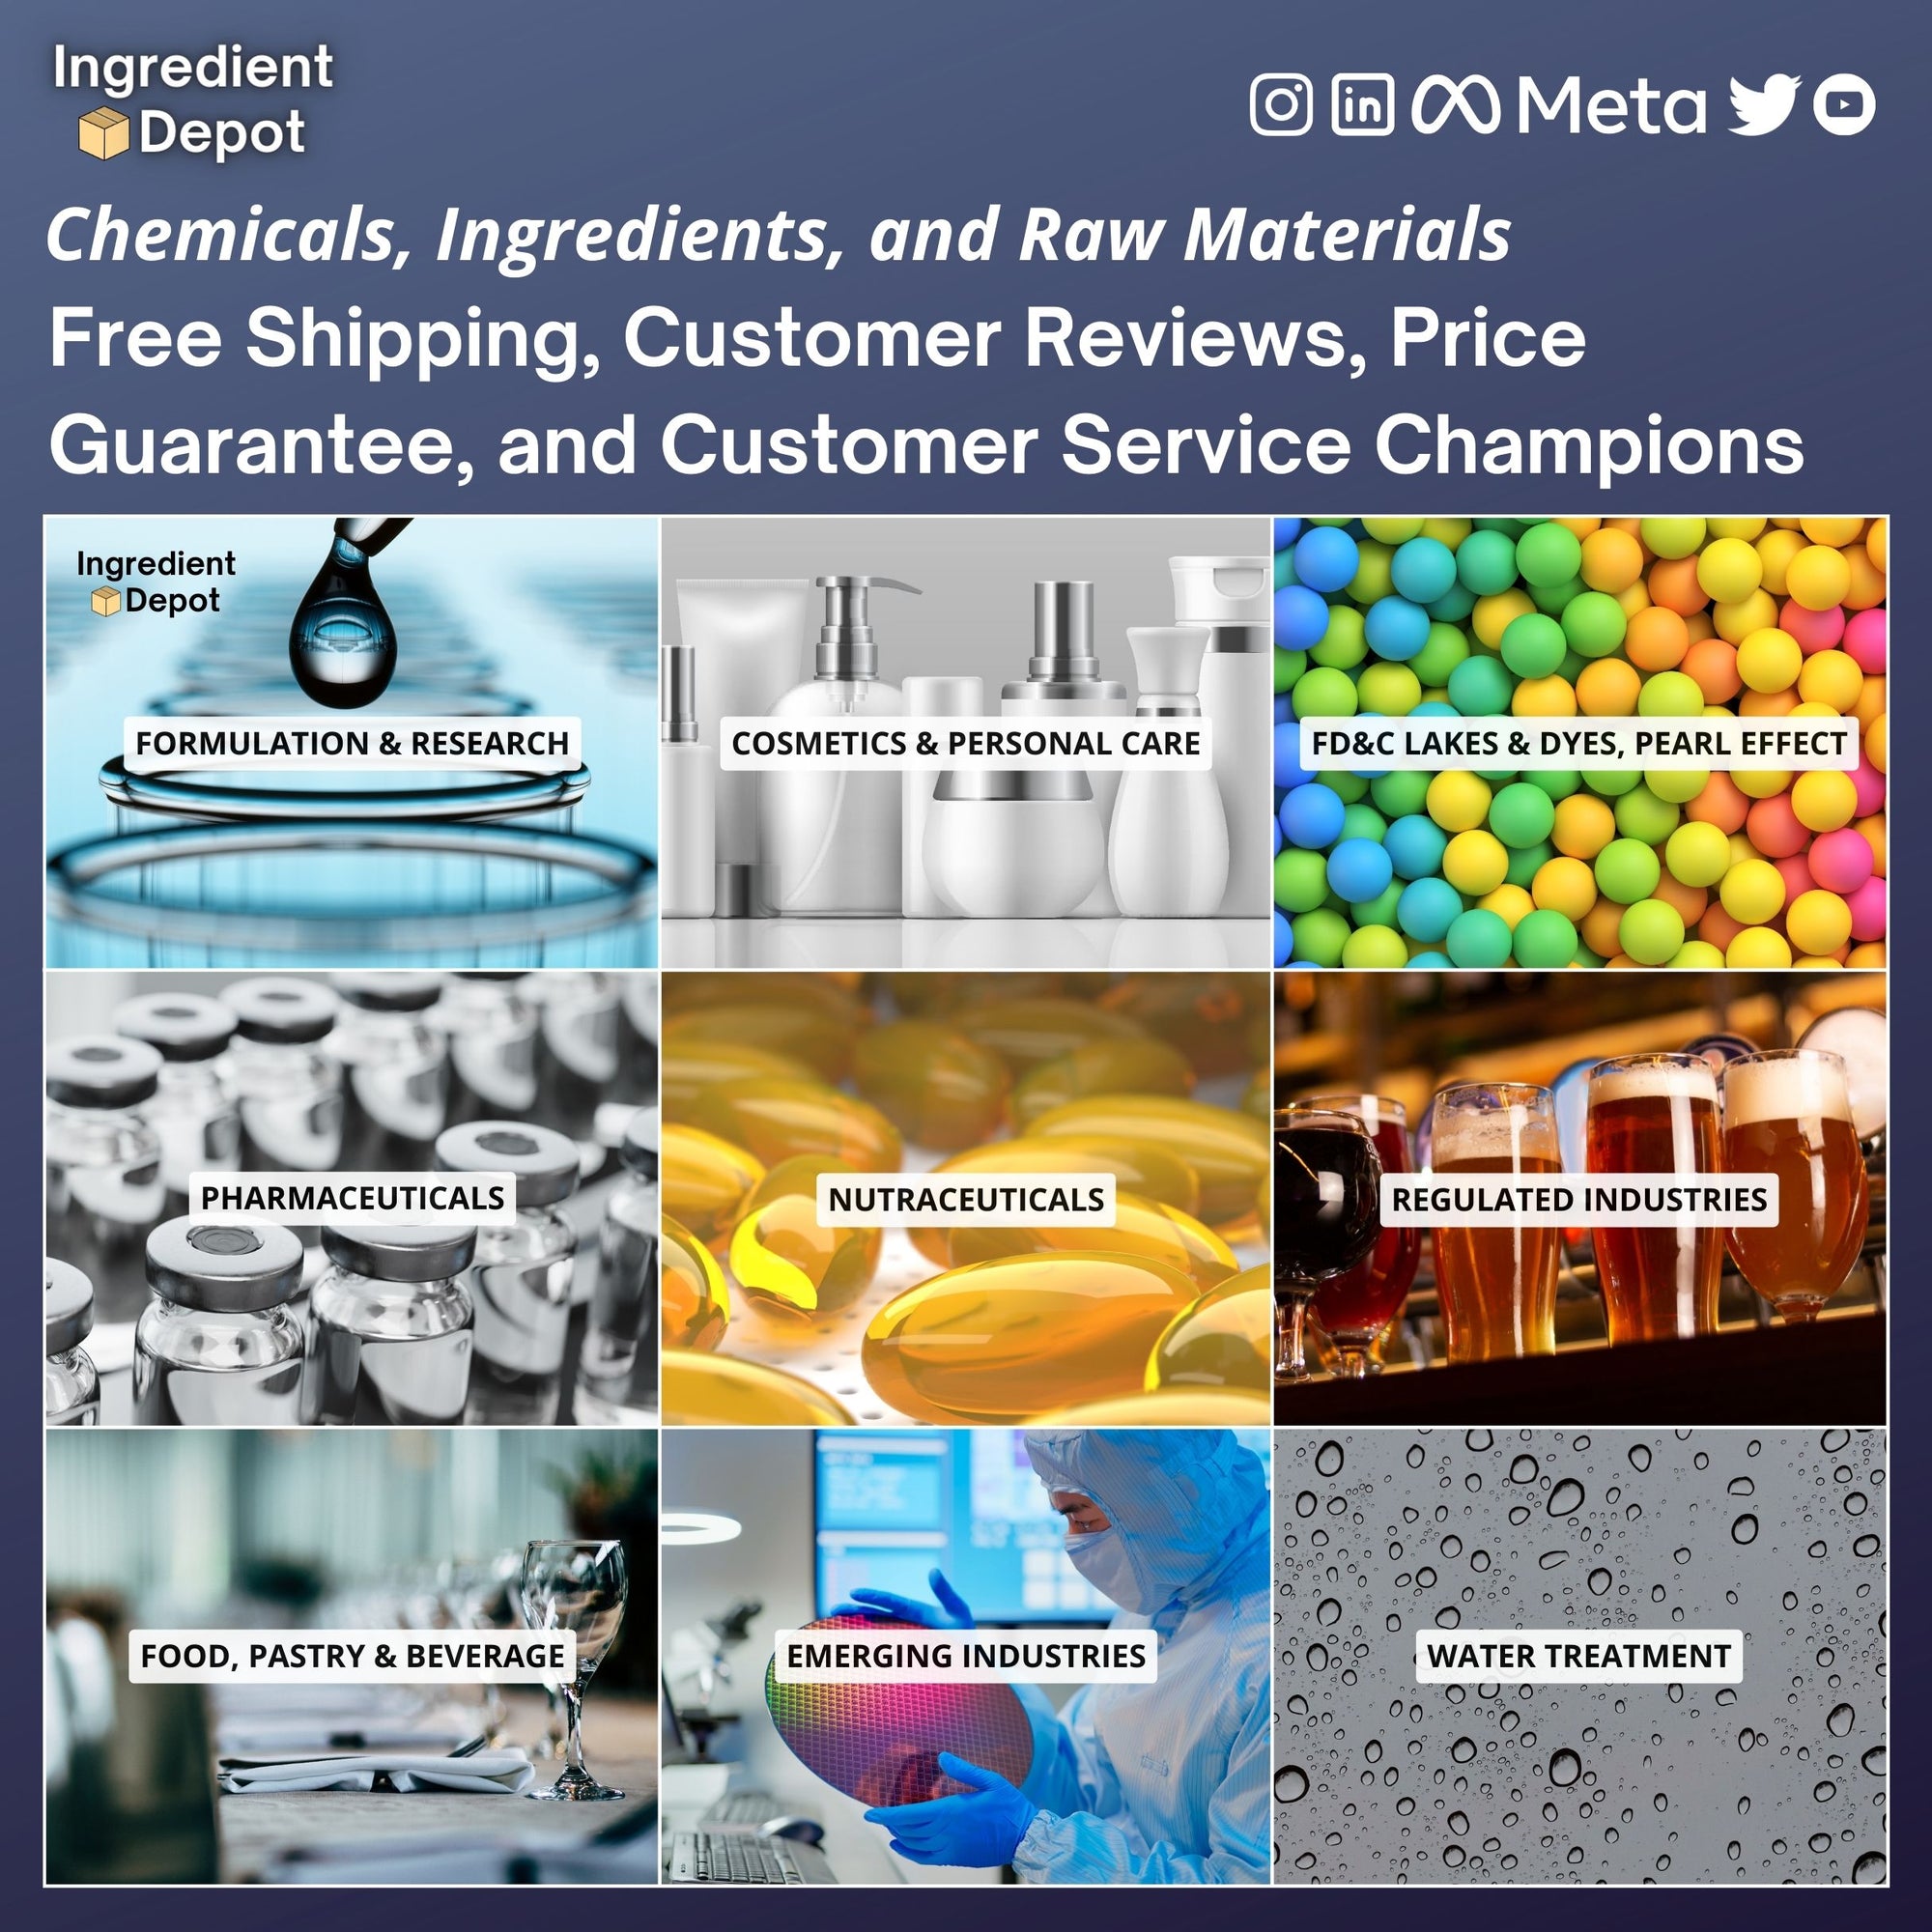 Ingredient Depot Promotions Chemicals, Ingredients and Raw Materials